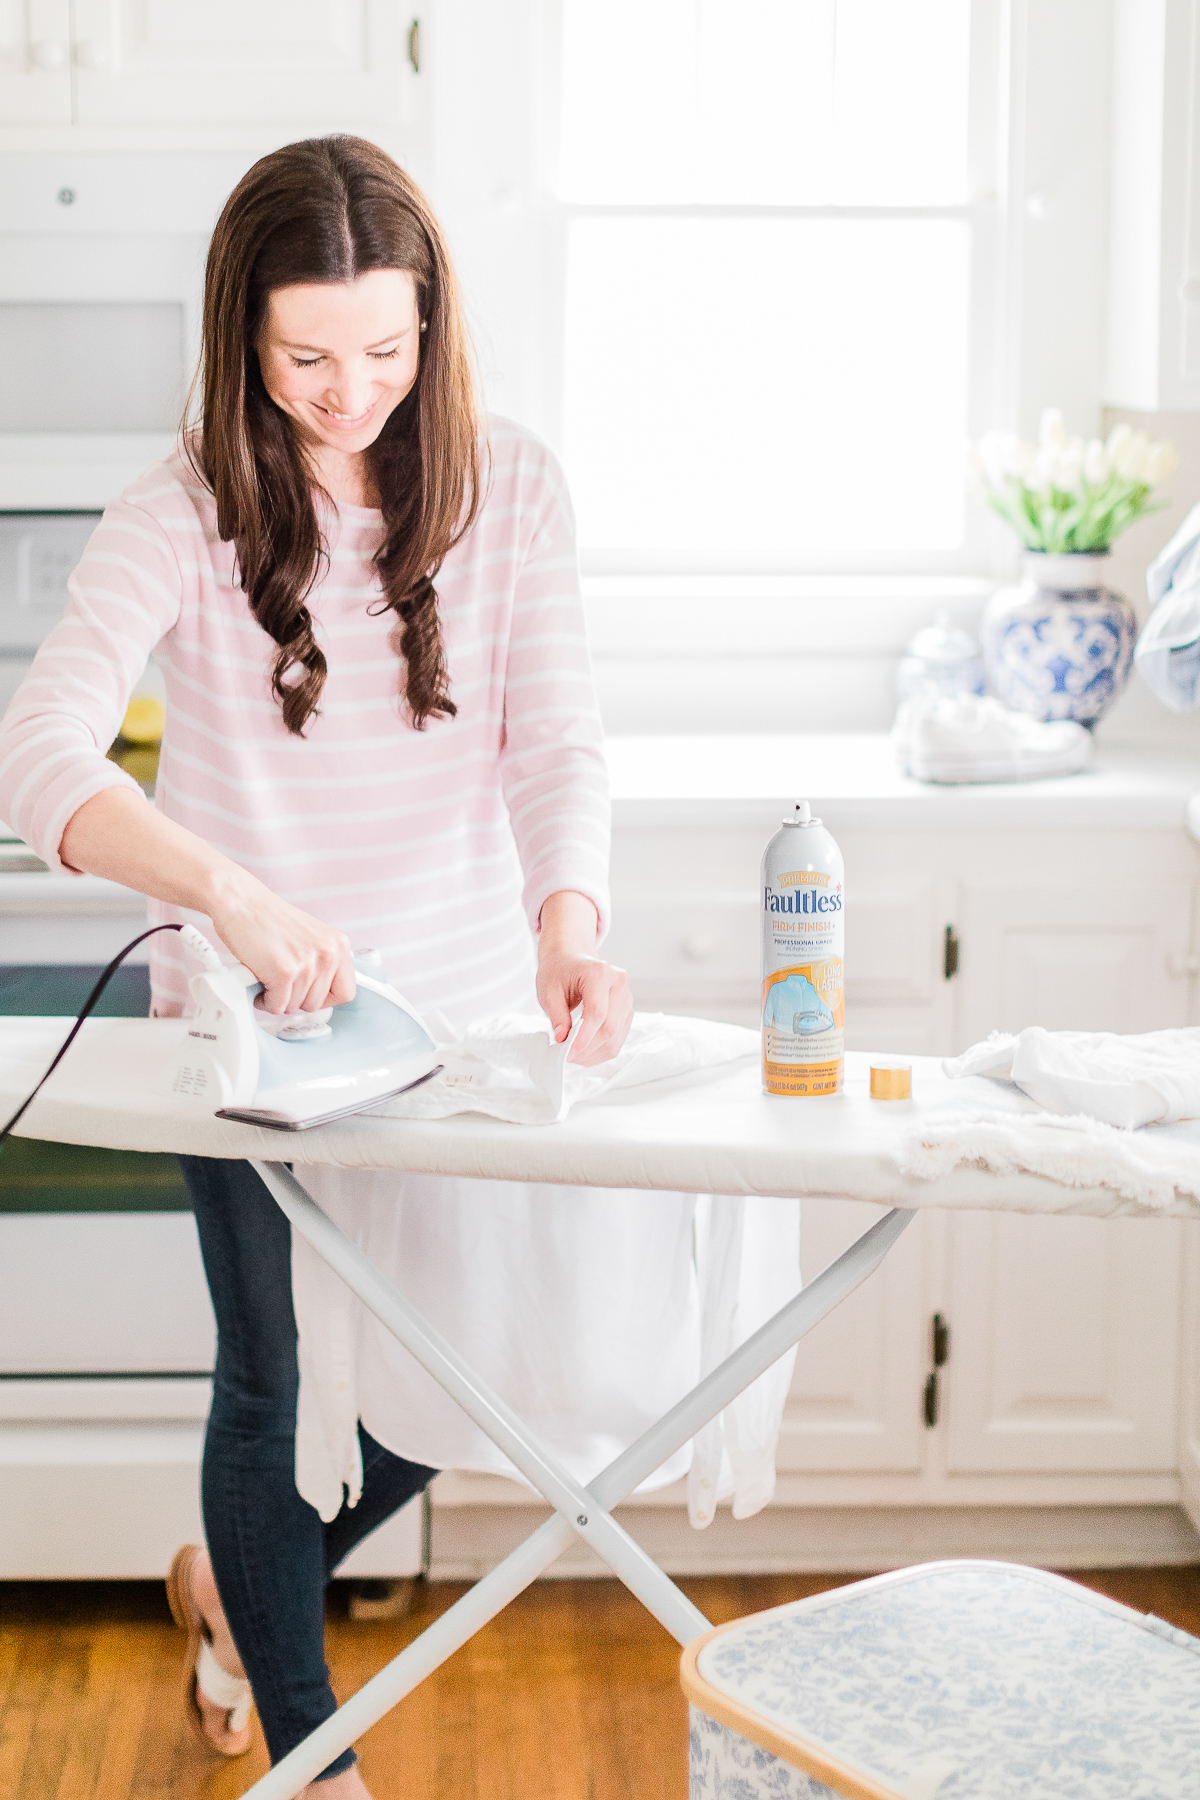 how to use starch spray, how to use spray starch ironing, how to iron with starch spray, how does spray starch work, Niagara Faultless Premium Starch spray uses, How to Use Starch Spray + 5 Must-Know Budget-Friendly Clothing Hacks by affordable fashion blogger Stephanie Ziajka from Diary of a Debutante